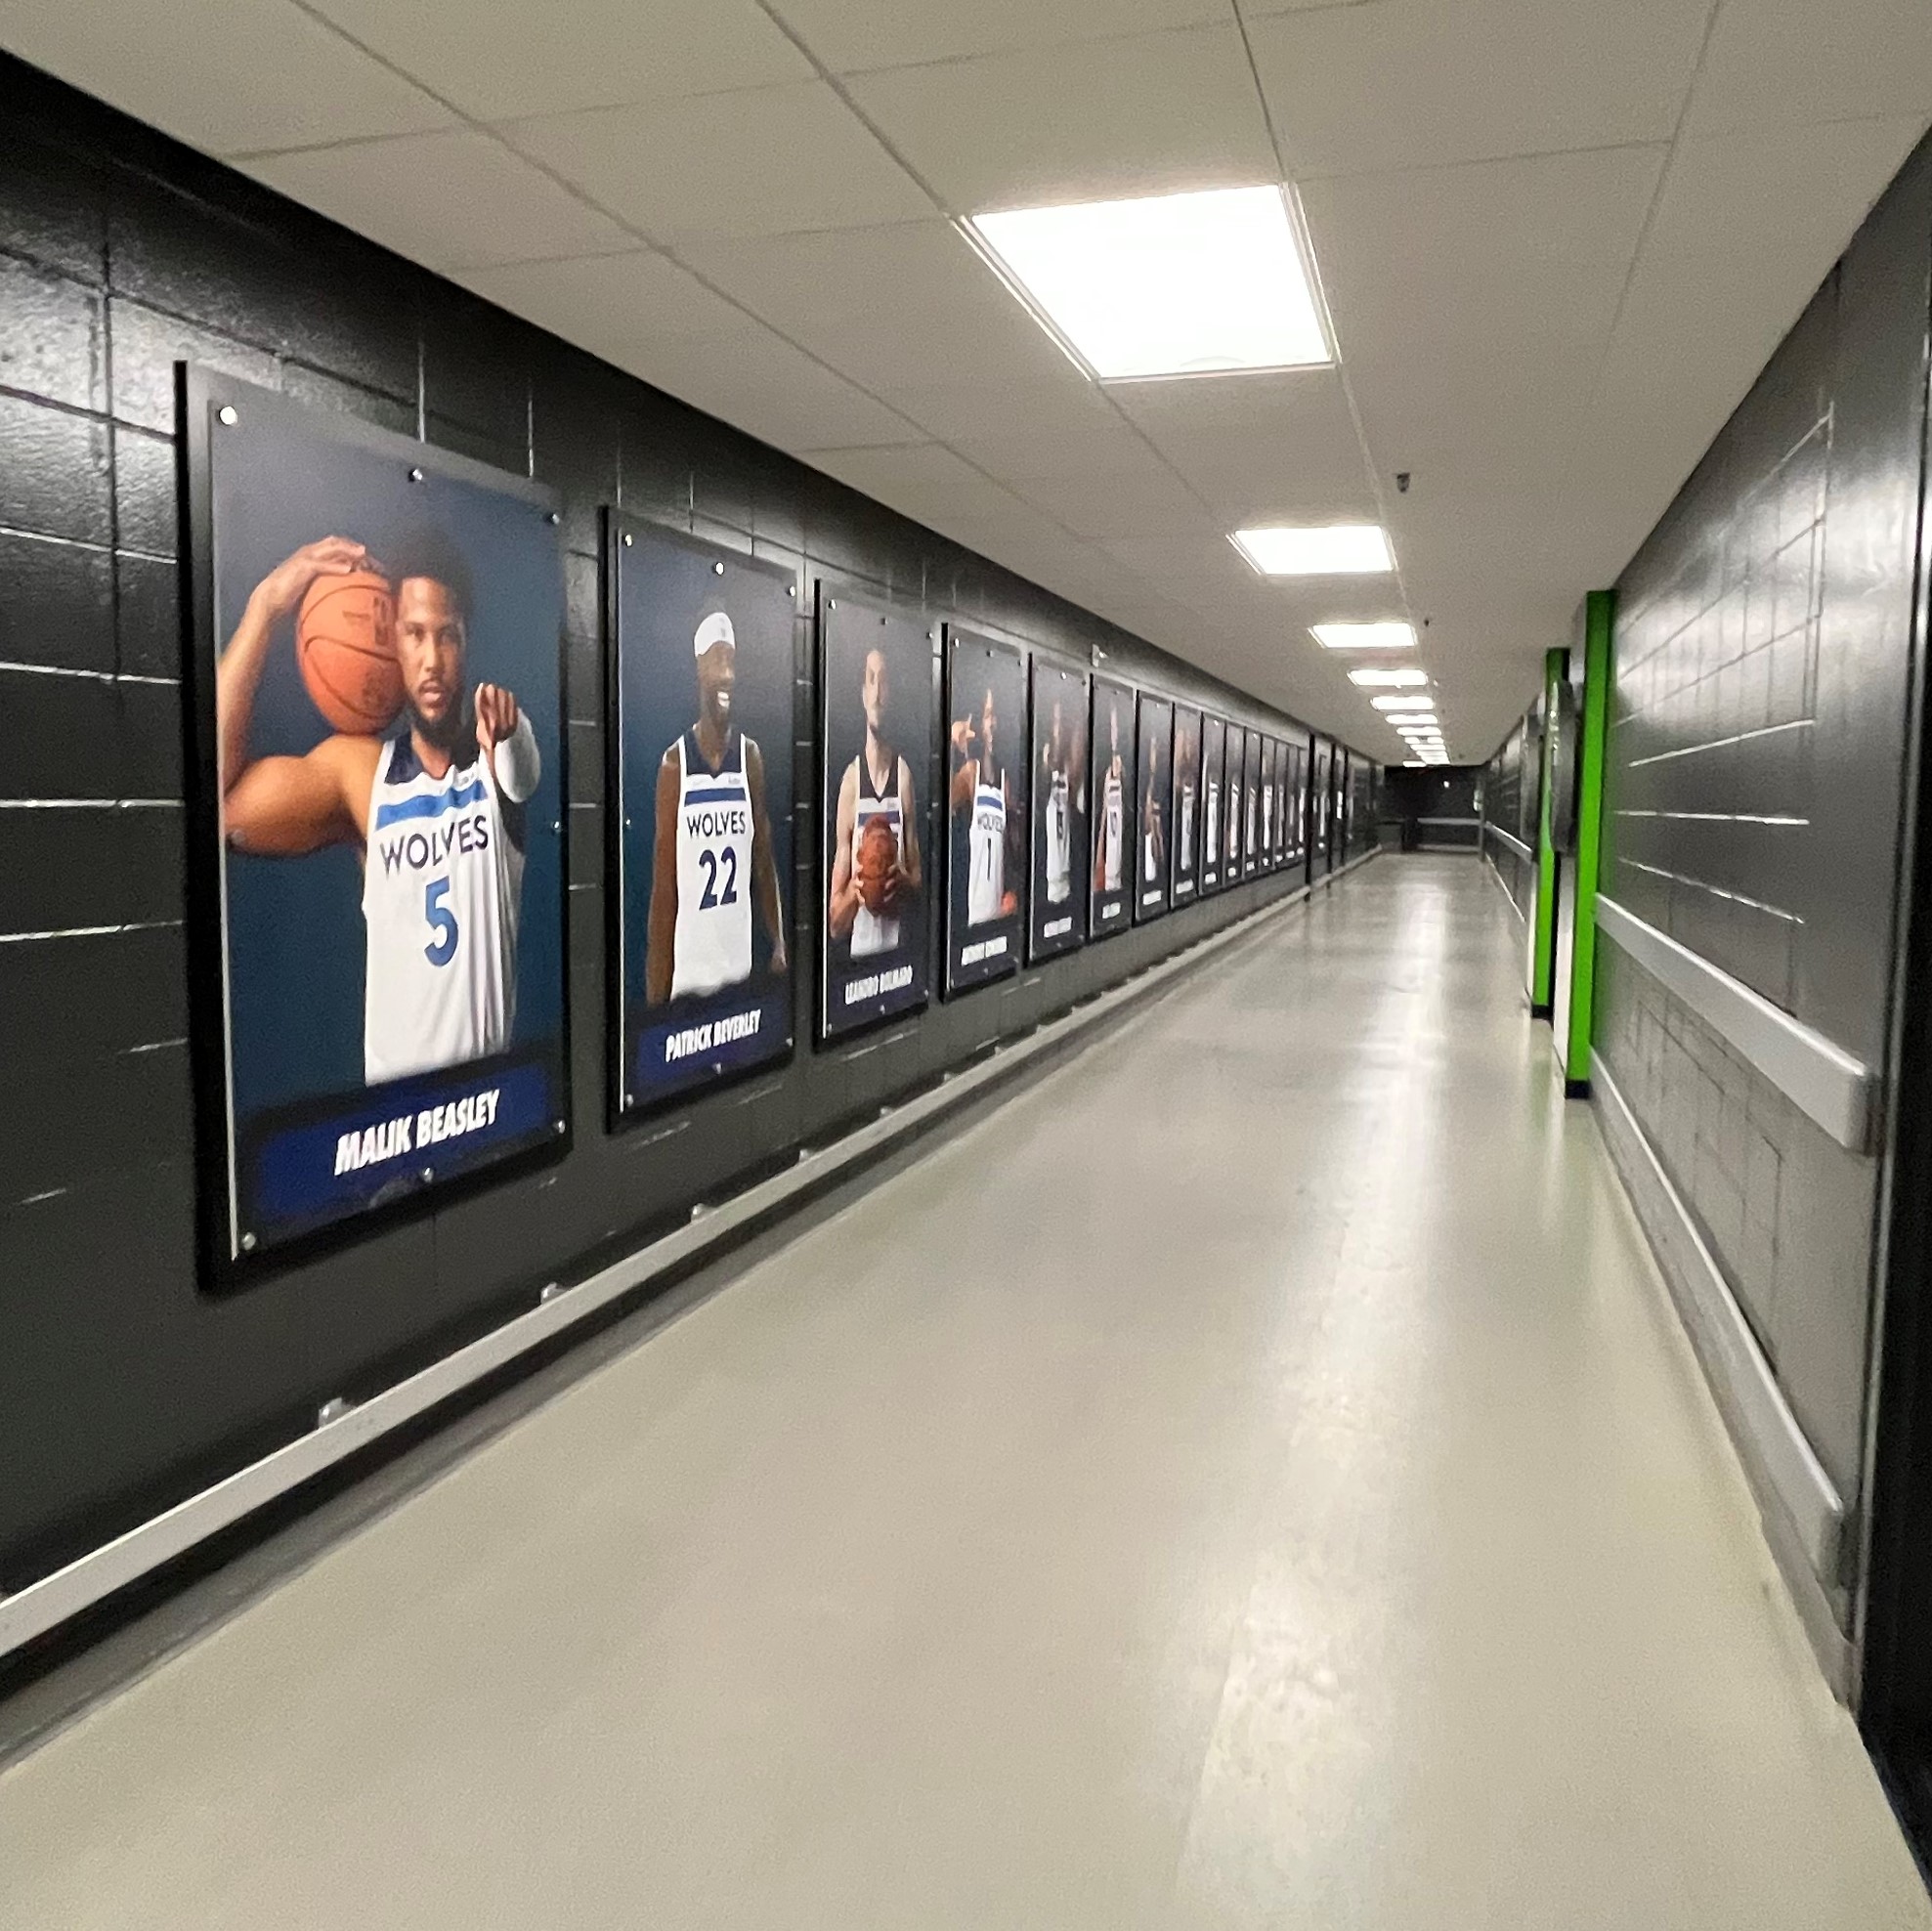 Commercial Stadium Hallway – Before & After After